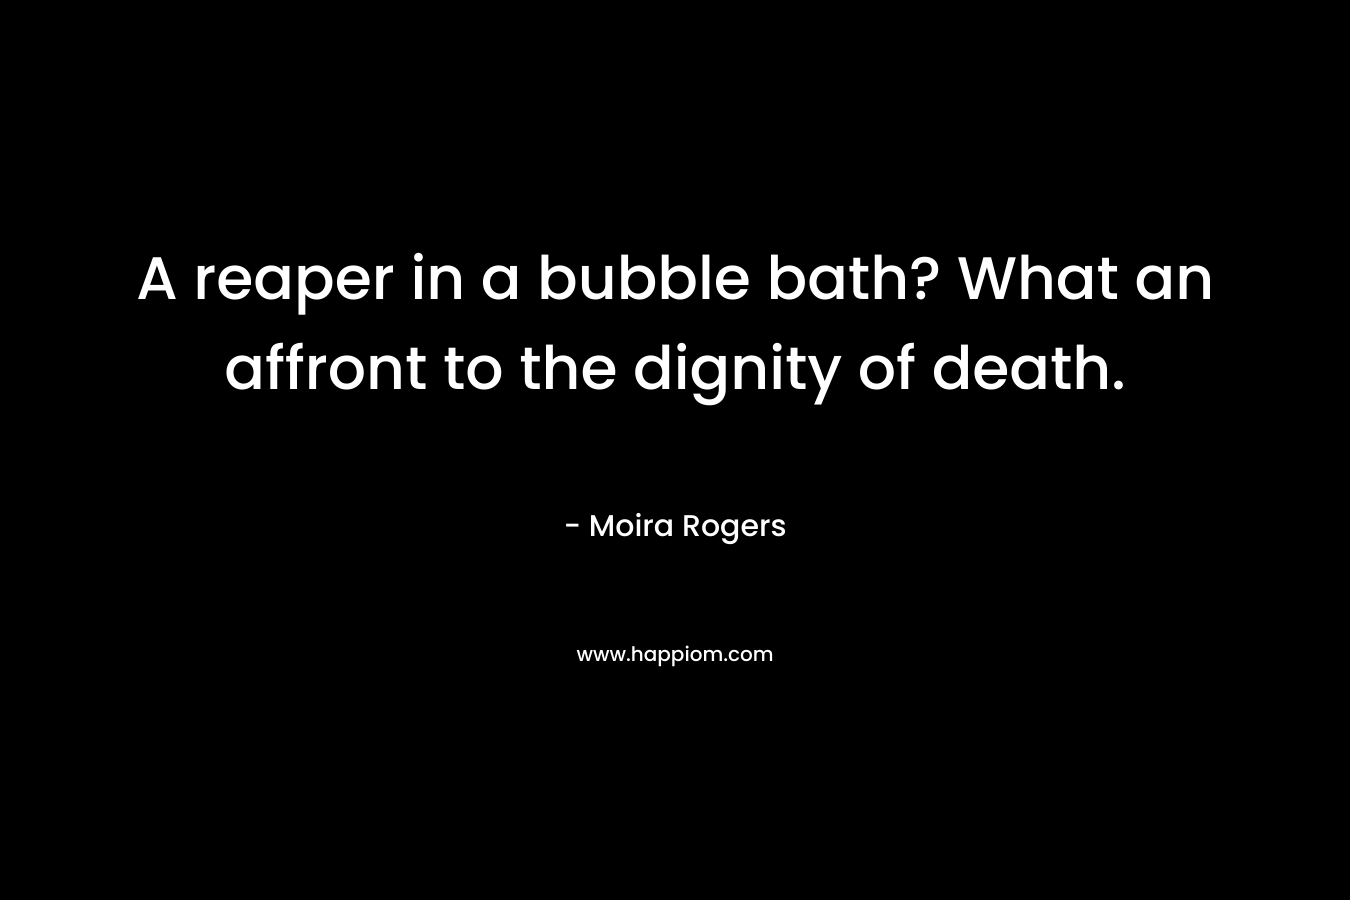 A reaper in a bubble bath? What an affront to the dignity of death. – Moira Rogers